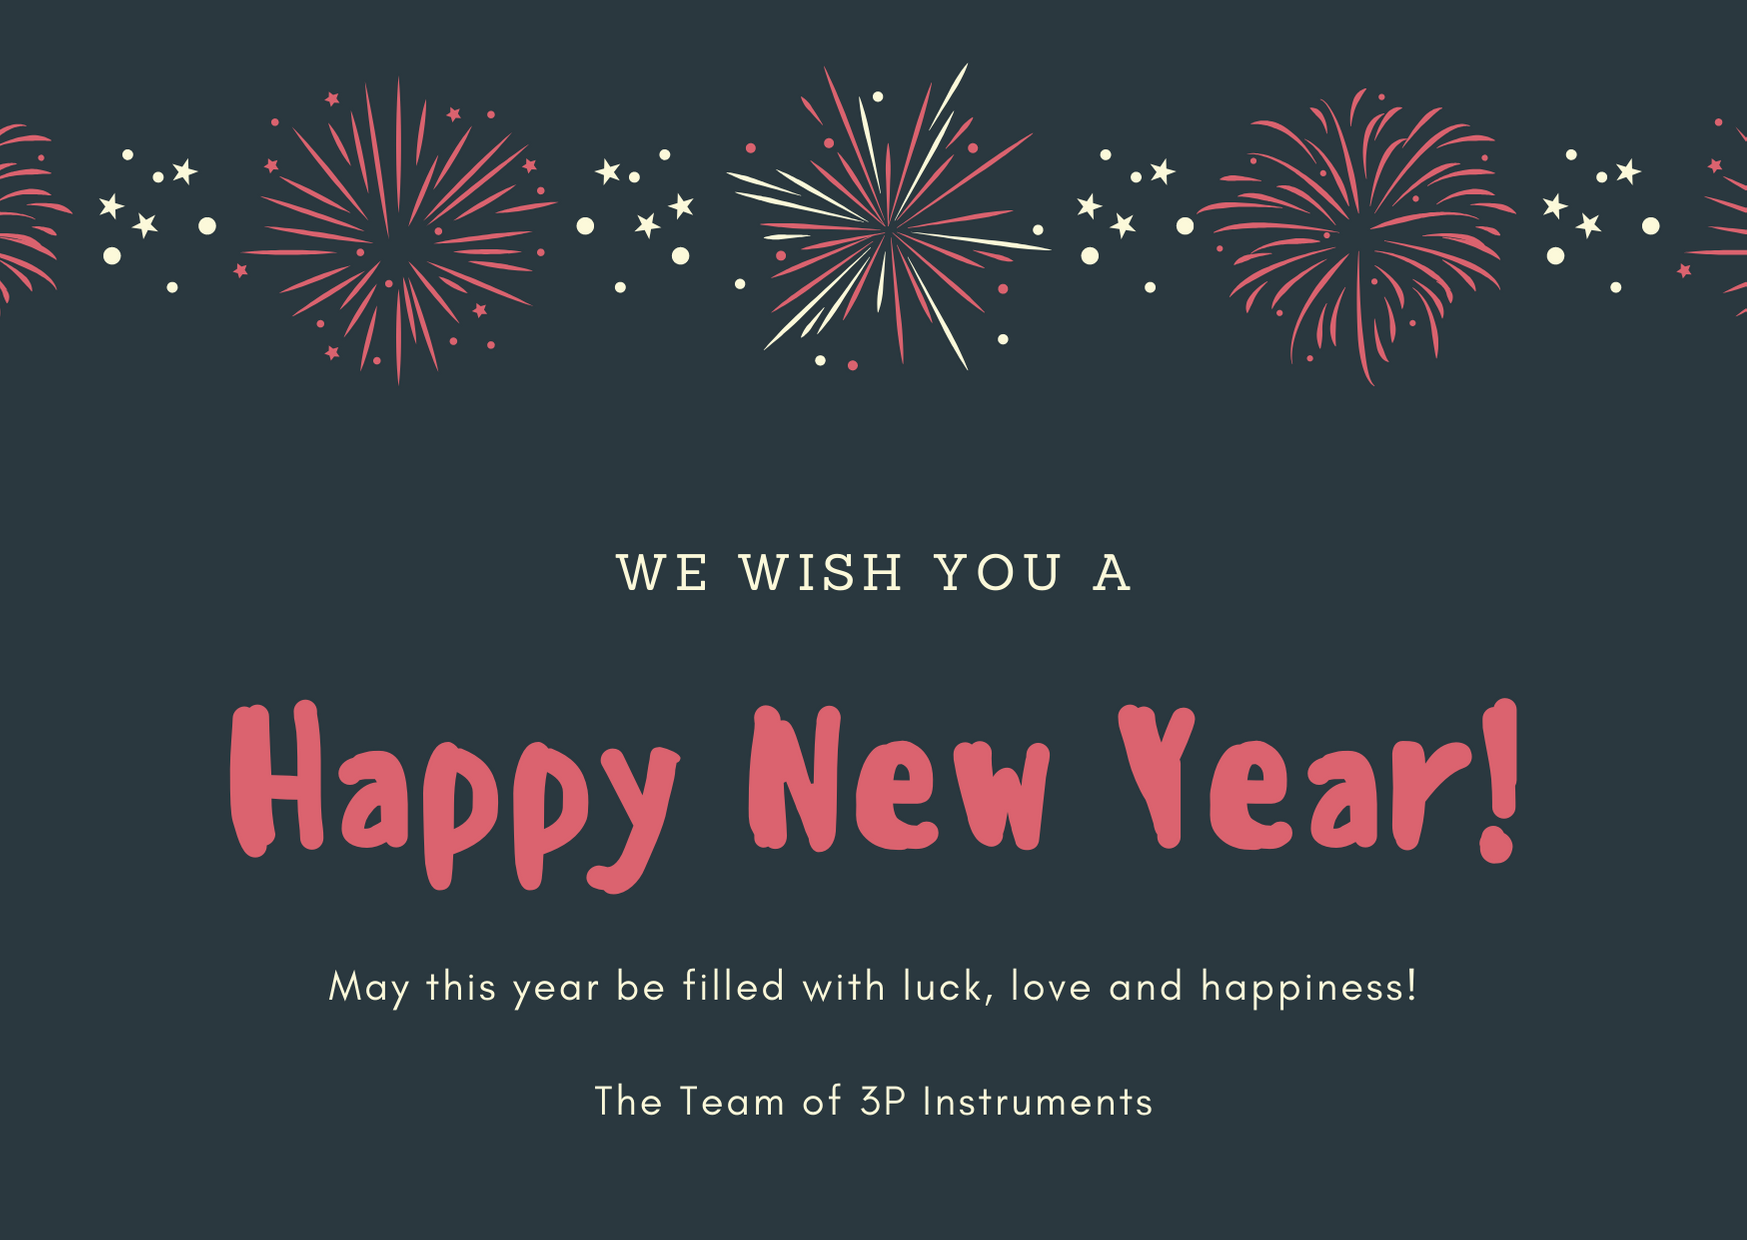 We wish you a happy and healthy new year 2020! 3P Instruments